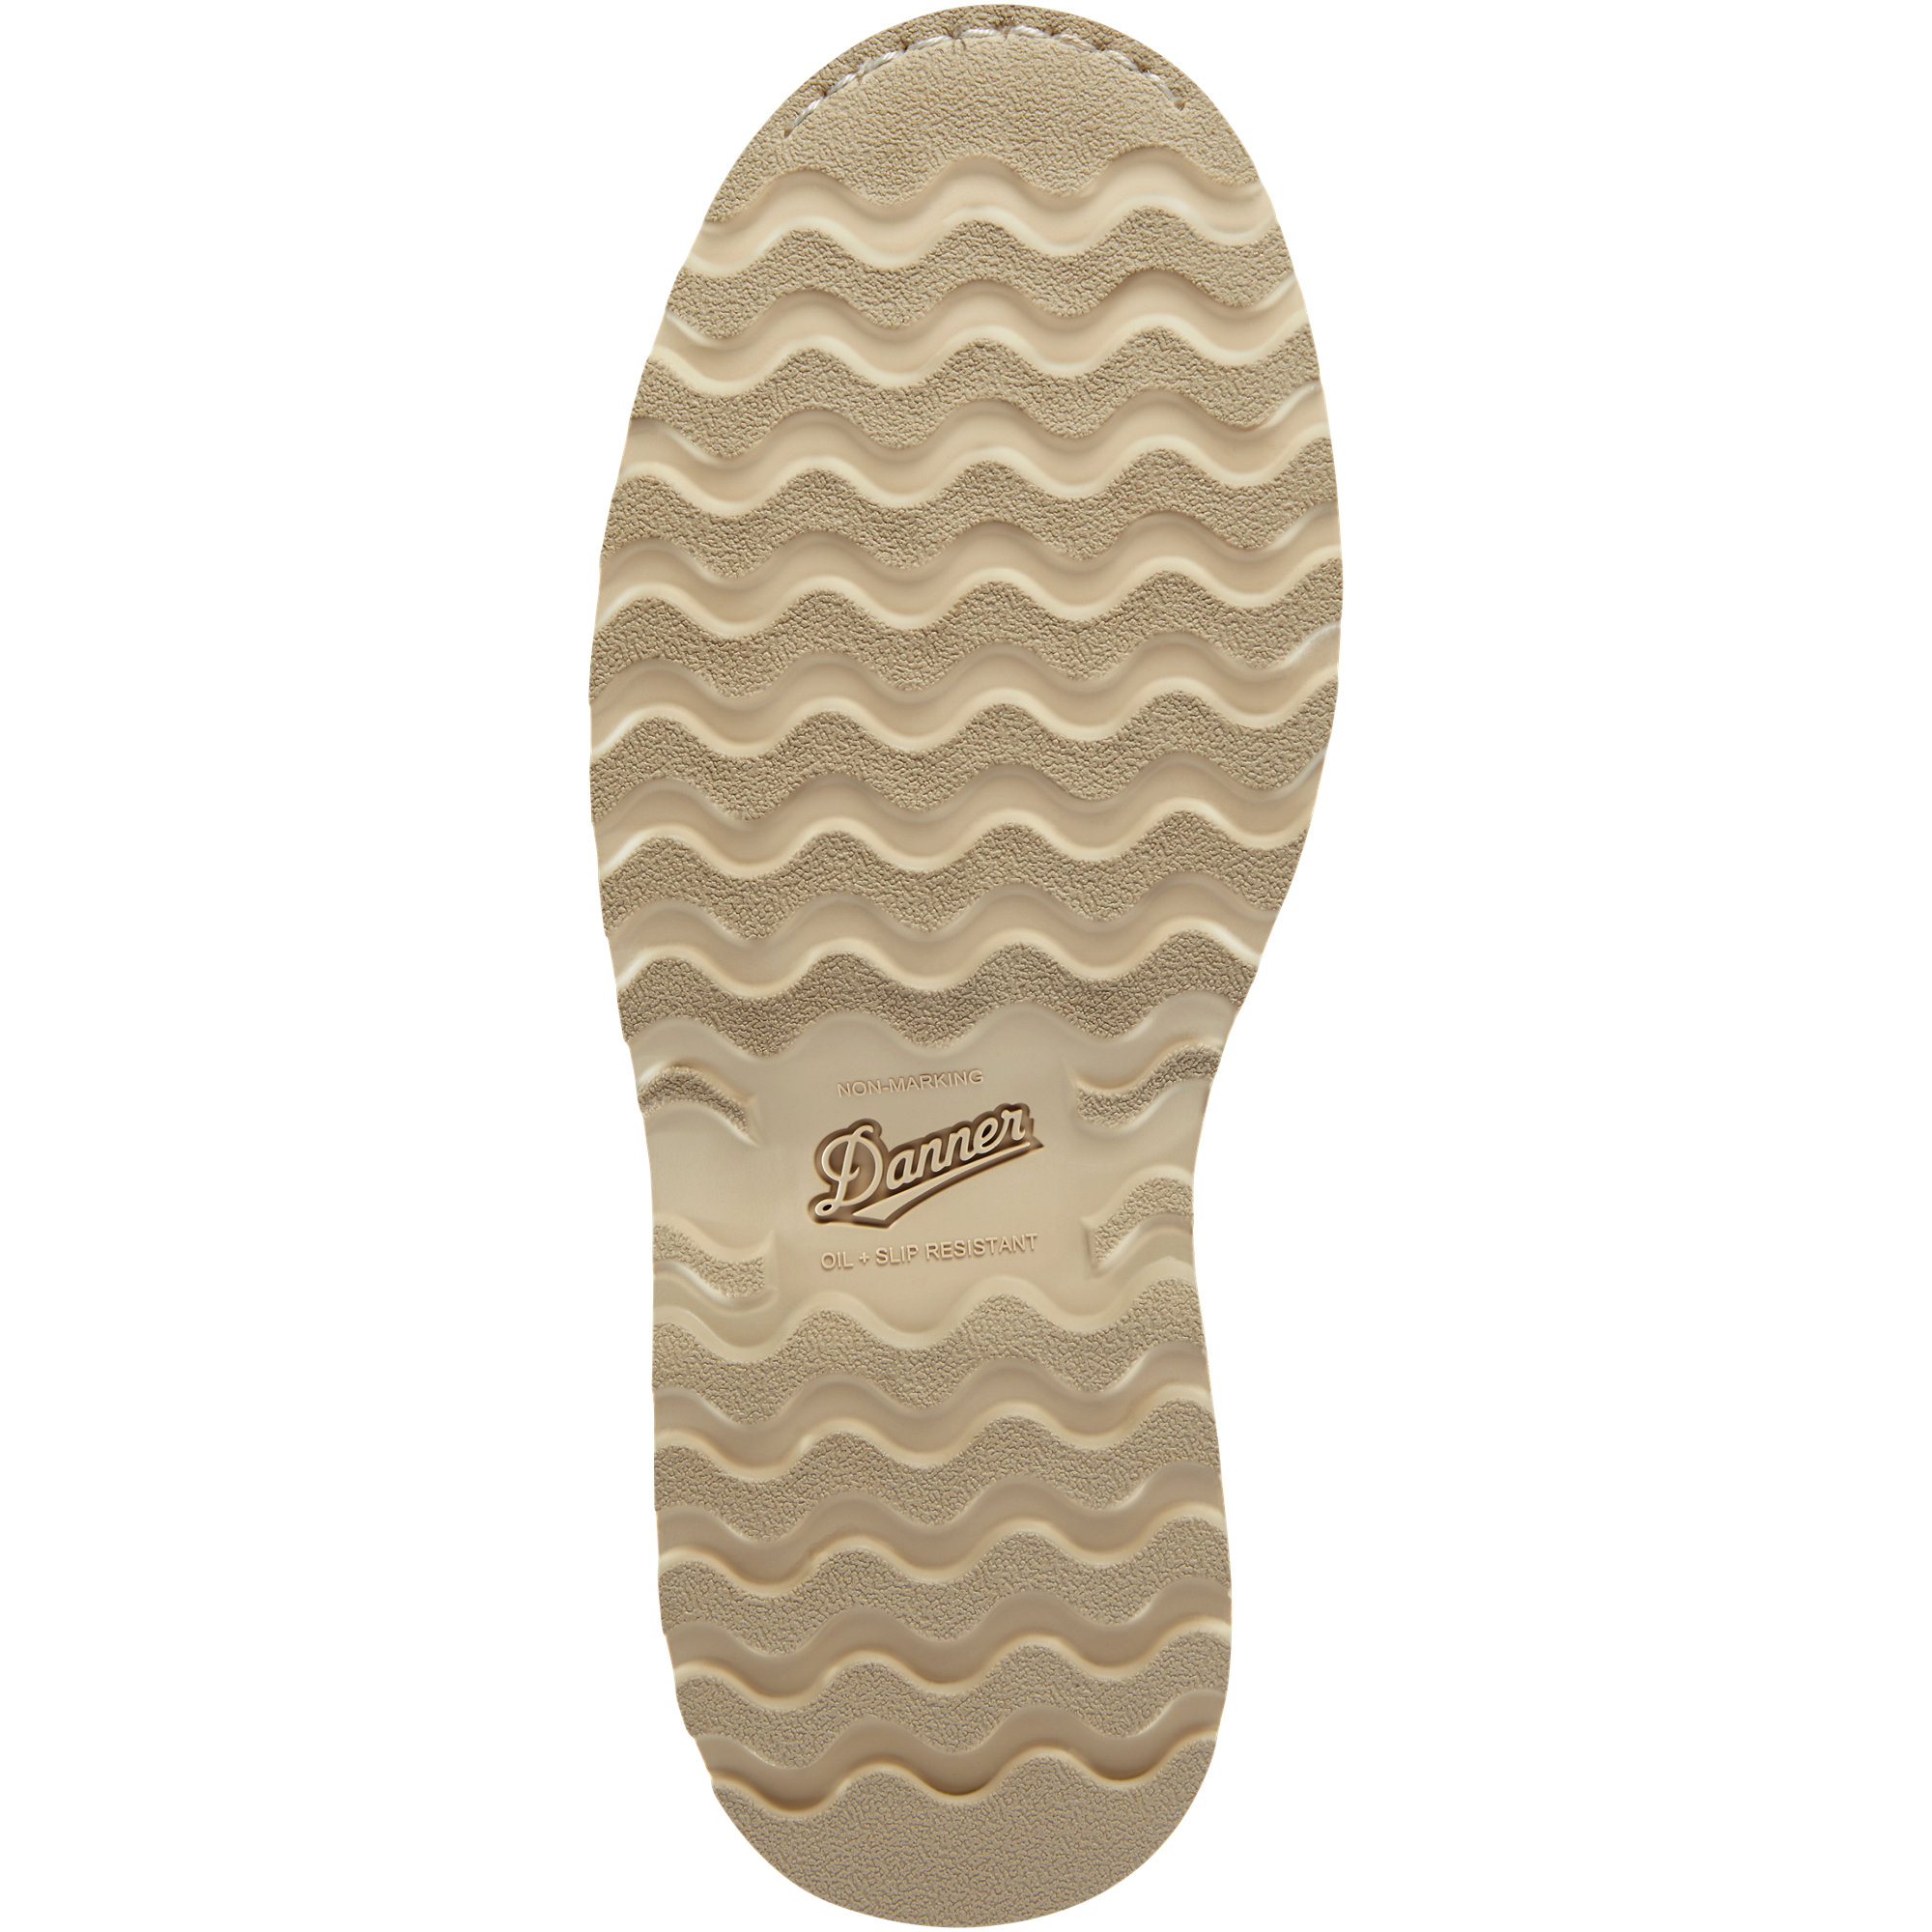 LaCrosse Cedar River 8 Inch Brown Aluminum Toe from GME Supply